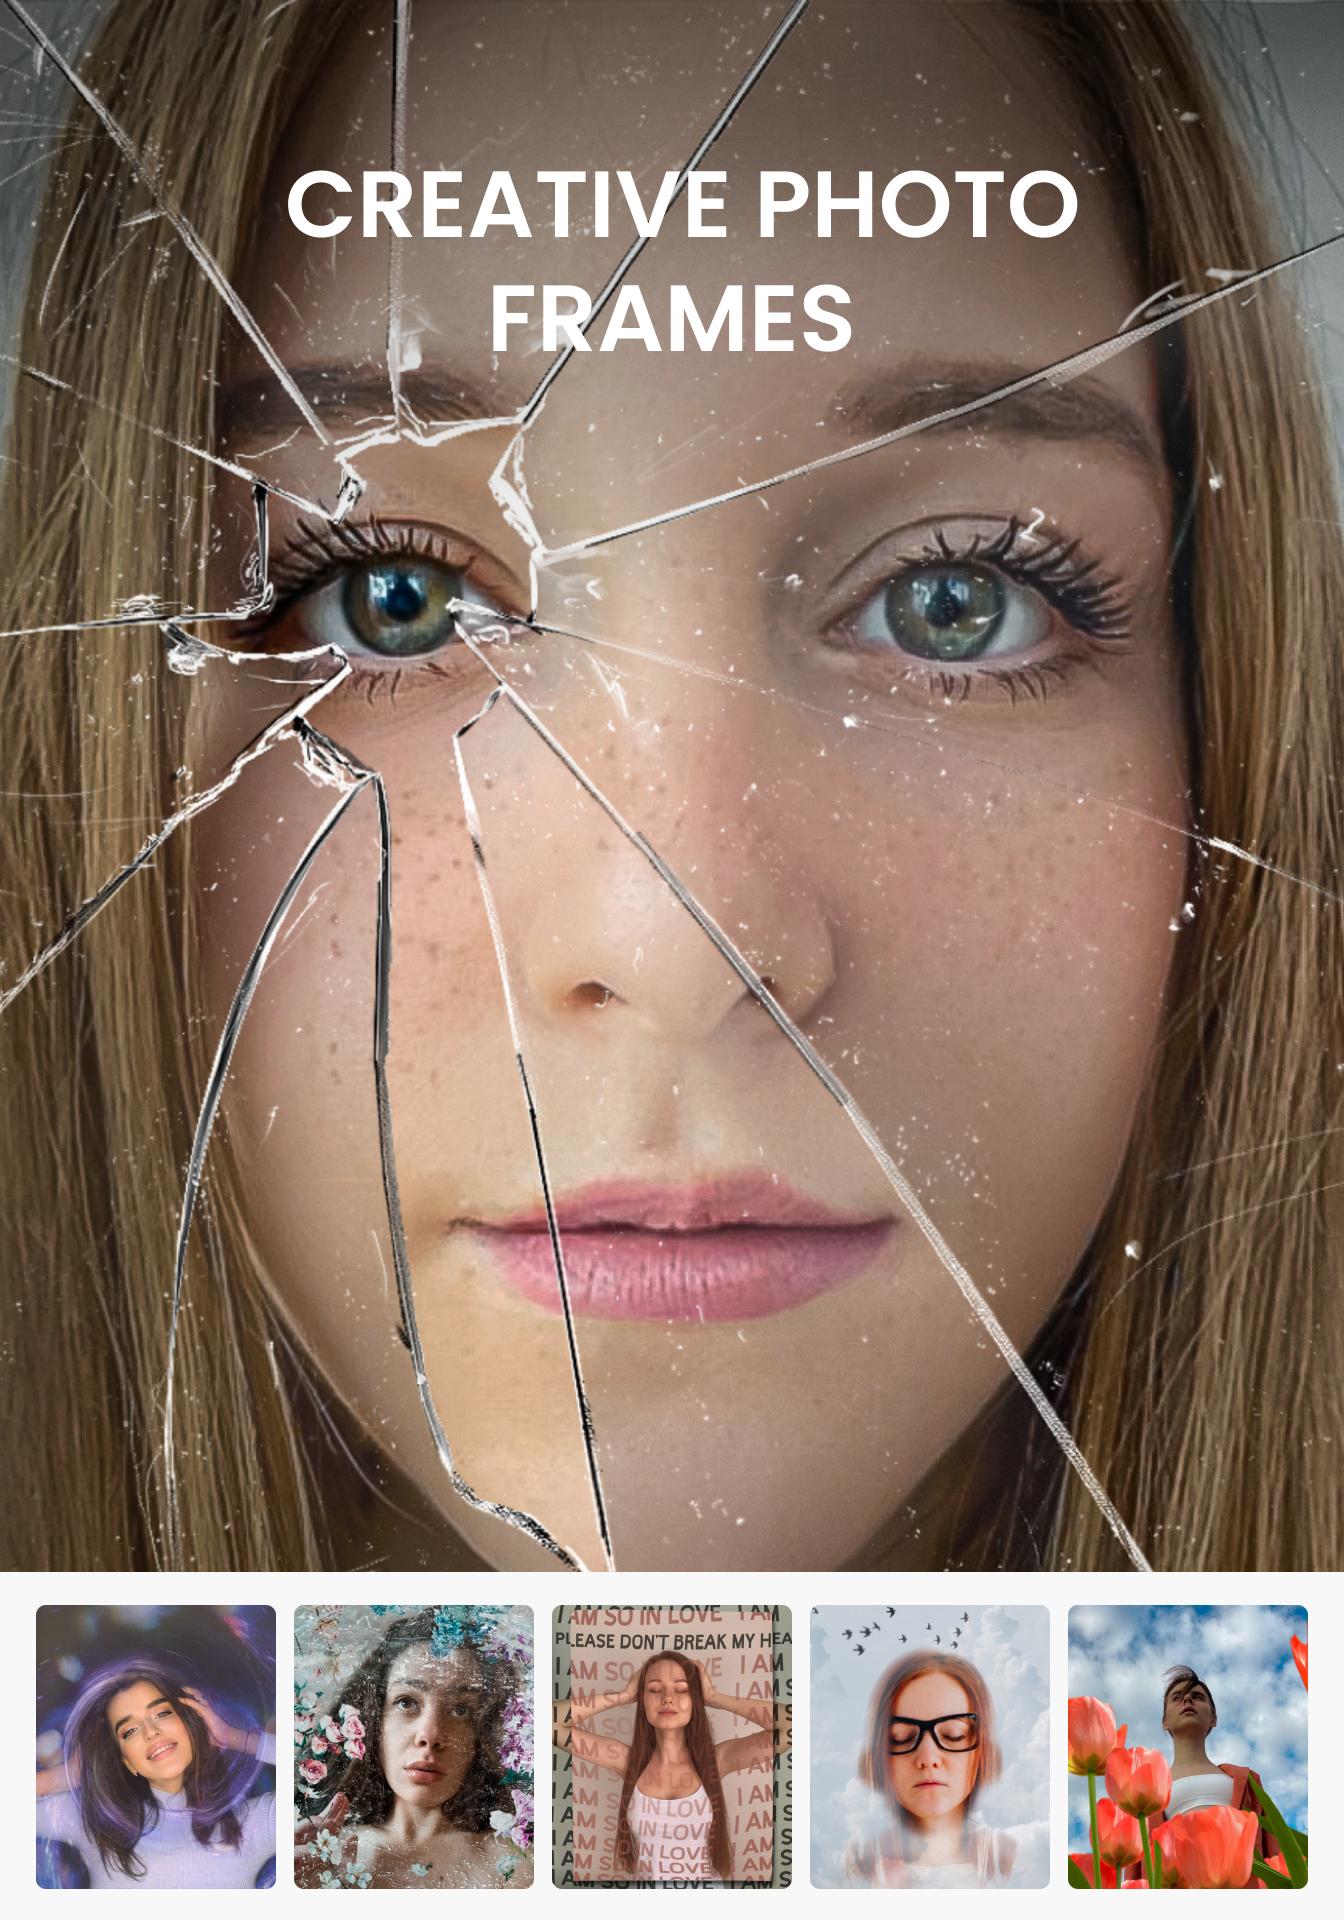 PicTrick – Creative photos in just 3 taps v.21.05.05.18 Screenshot 3